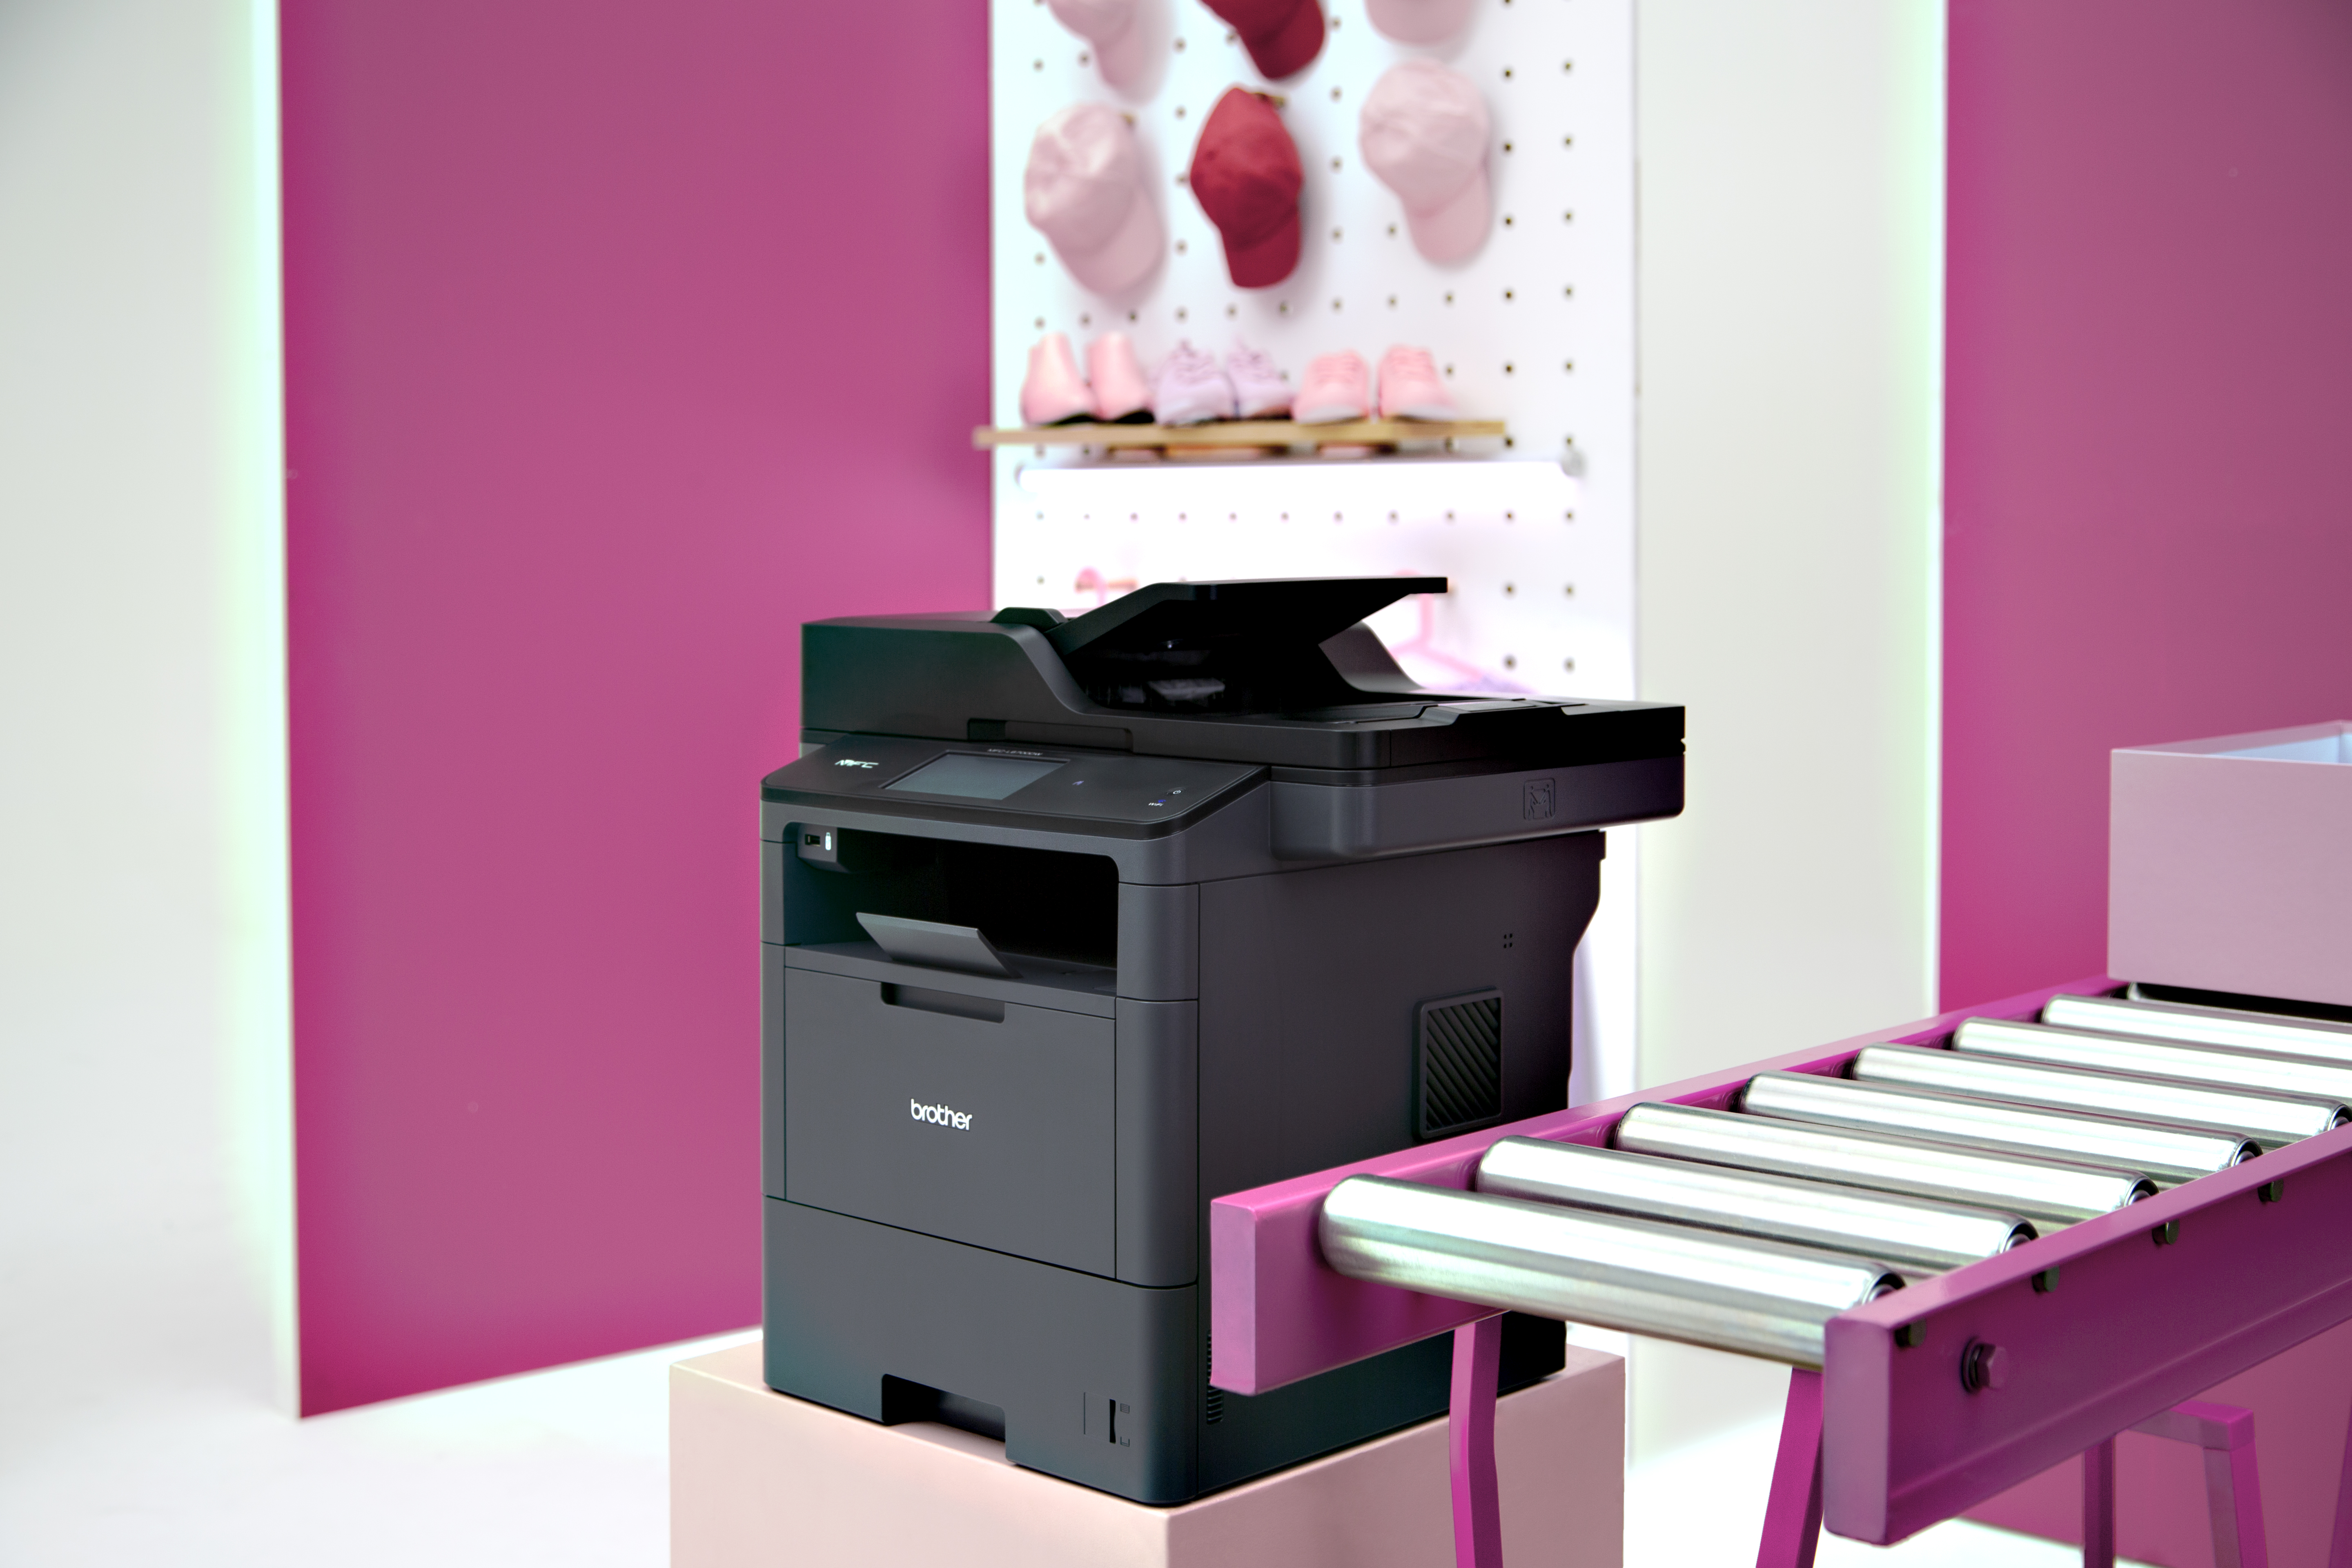 MFC L6700DW printer - Made for taking orders: Mono Laser Multi-Function Printer MFC-L6700DW